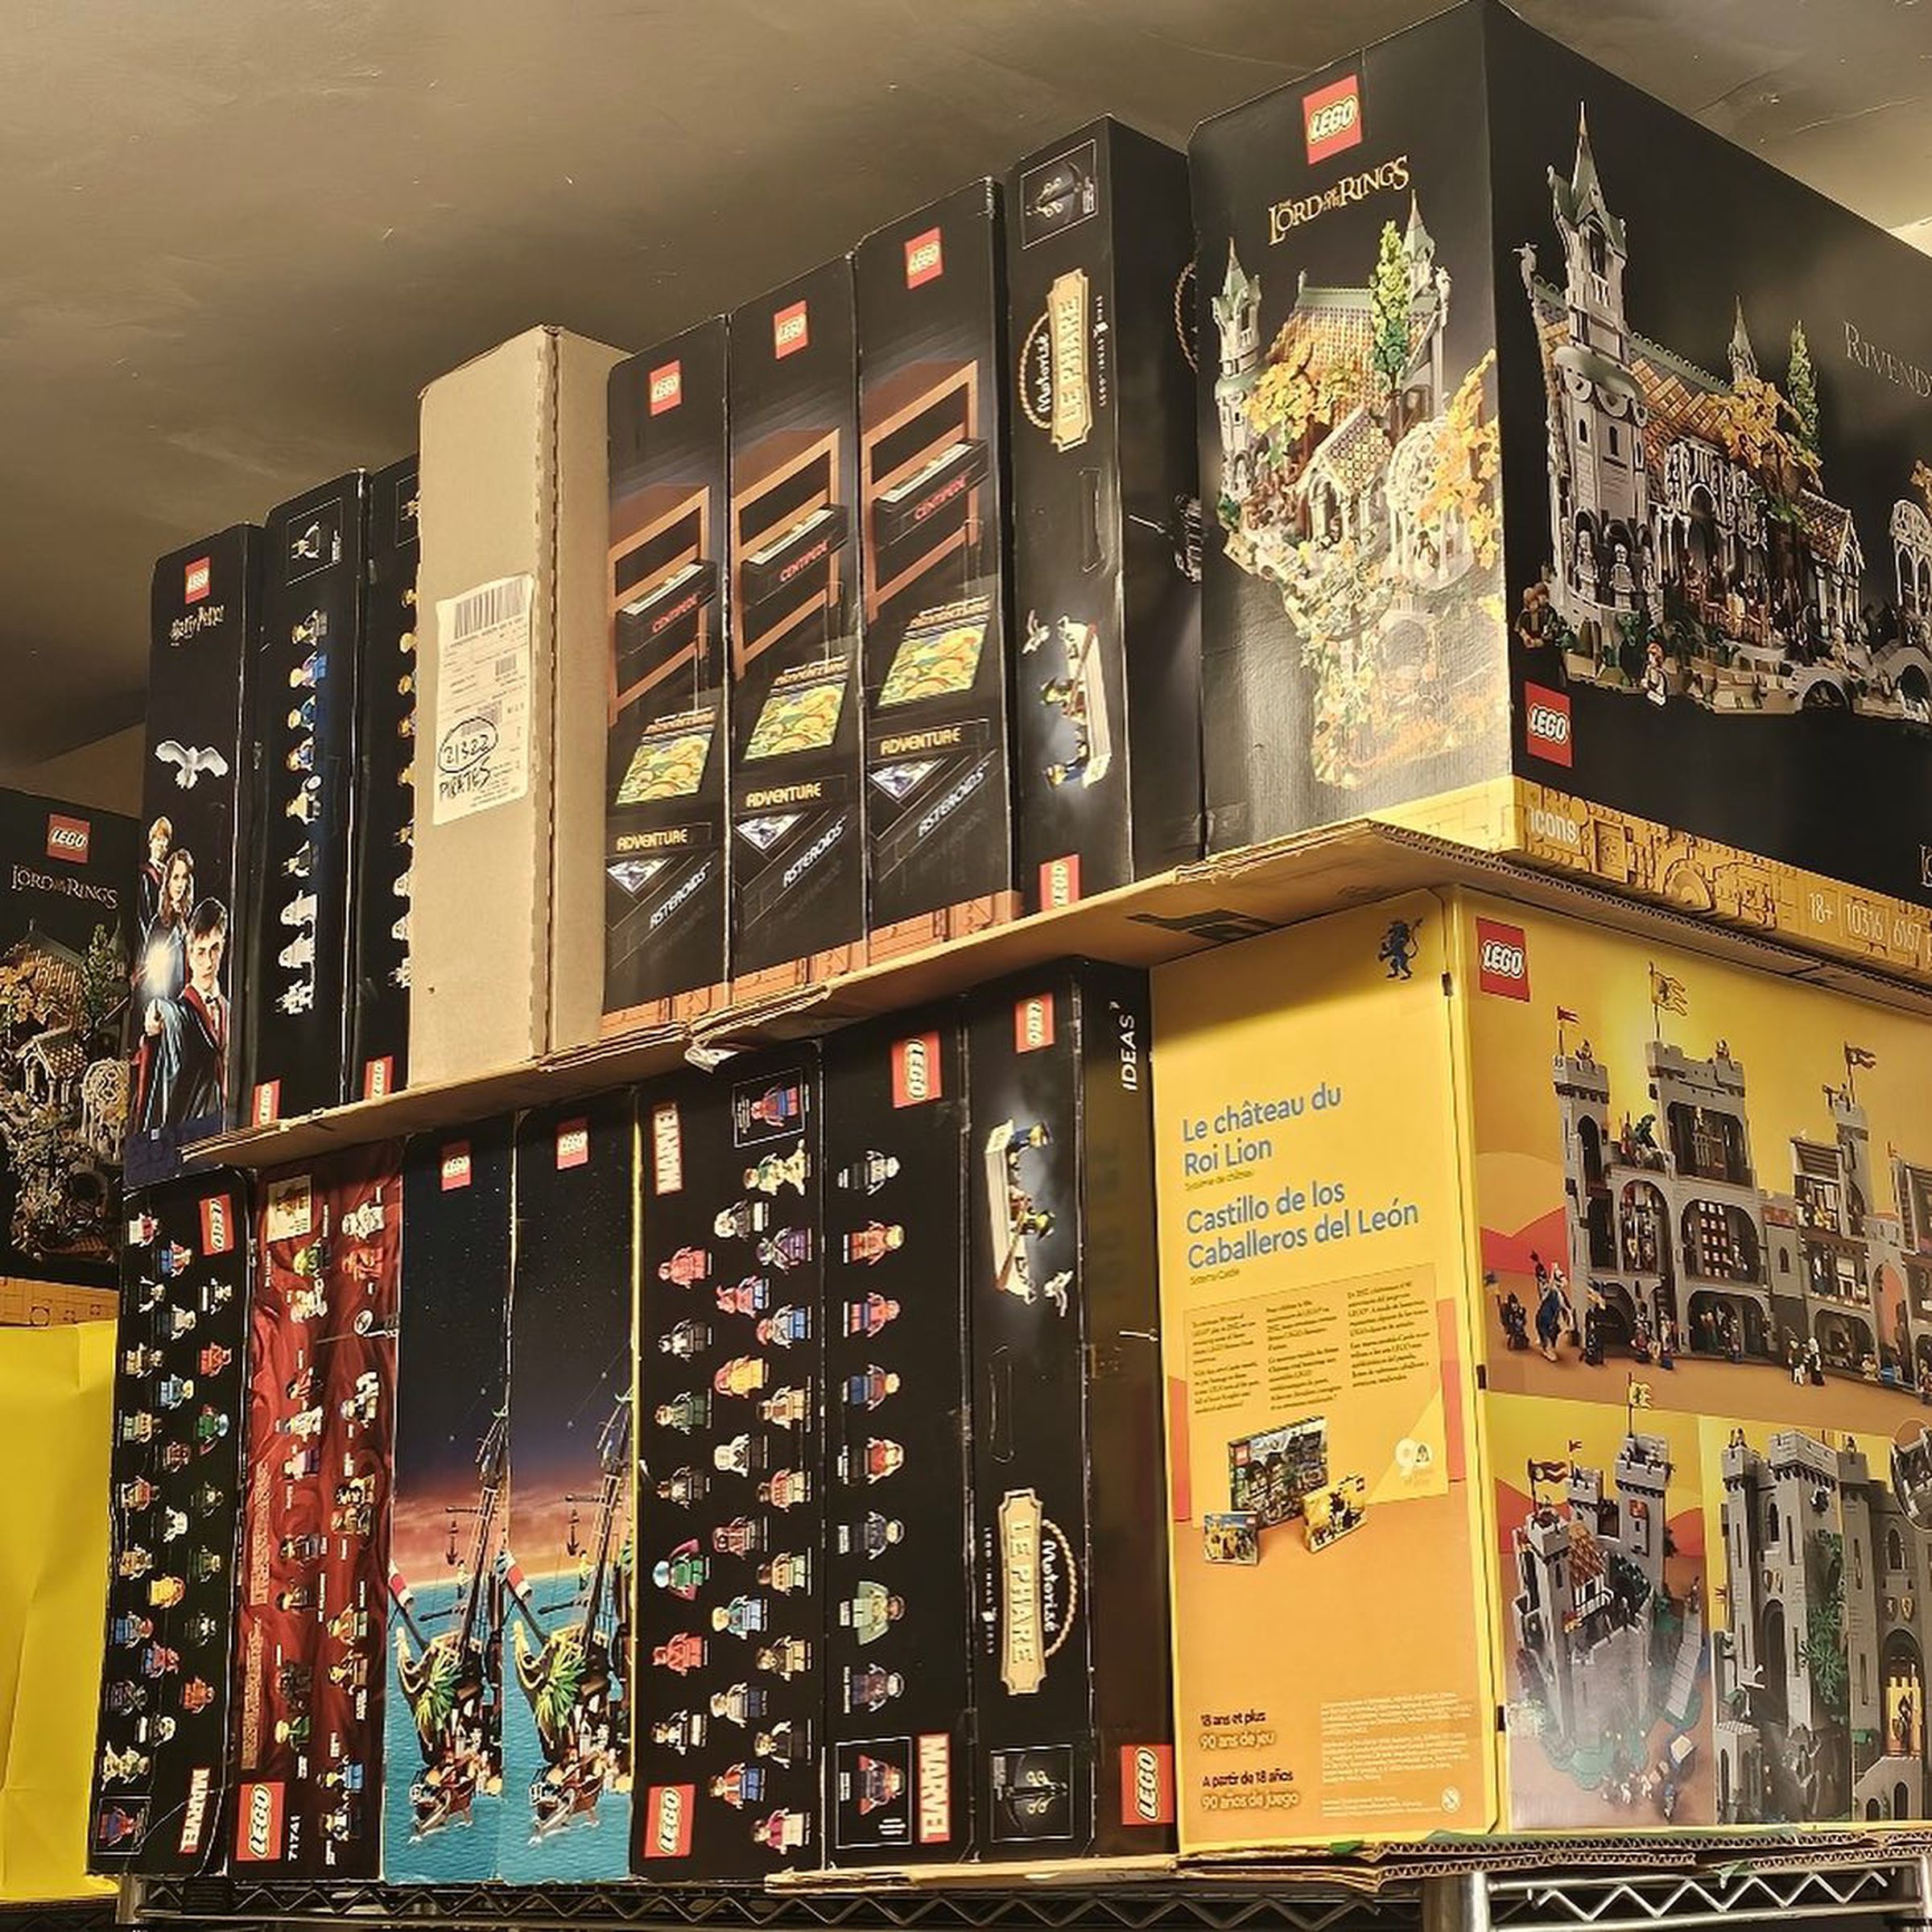 A picture of stolen Lego sets, including the Lord of the Rings Rivendell set.